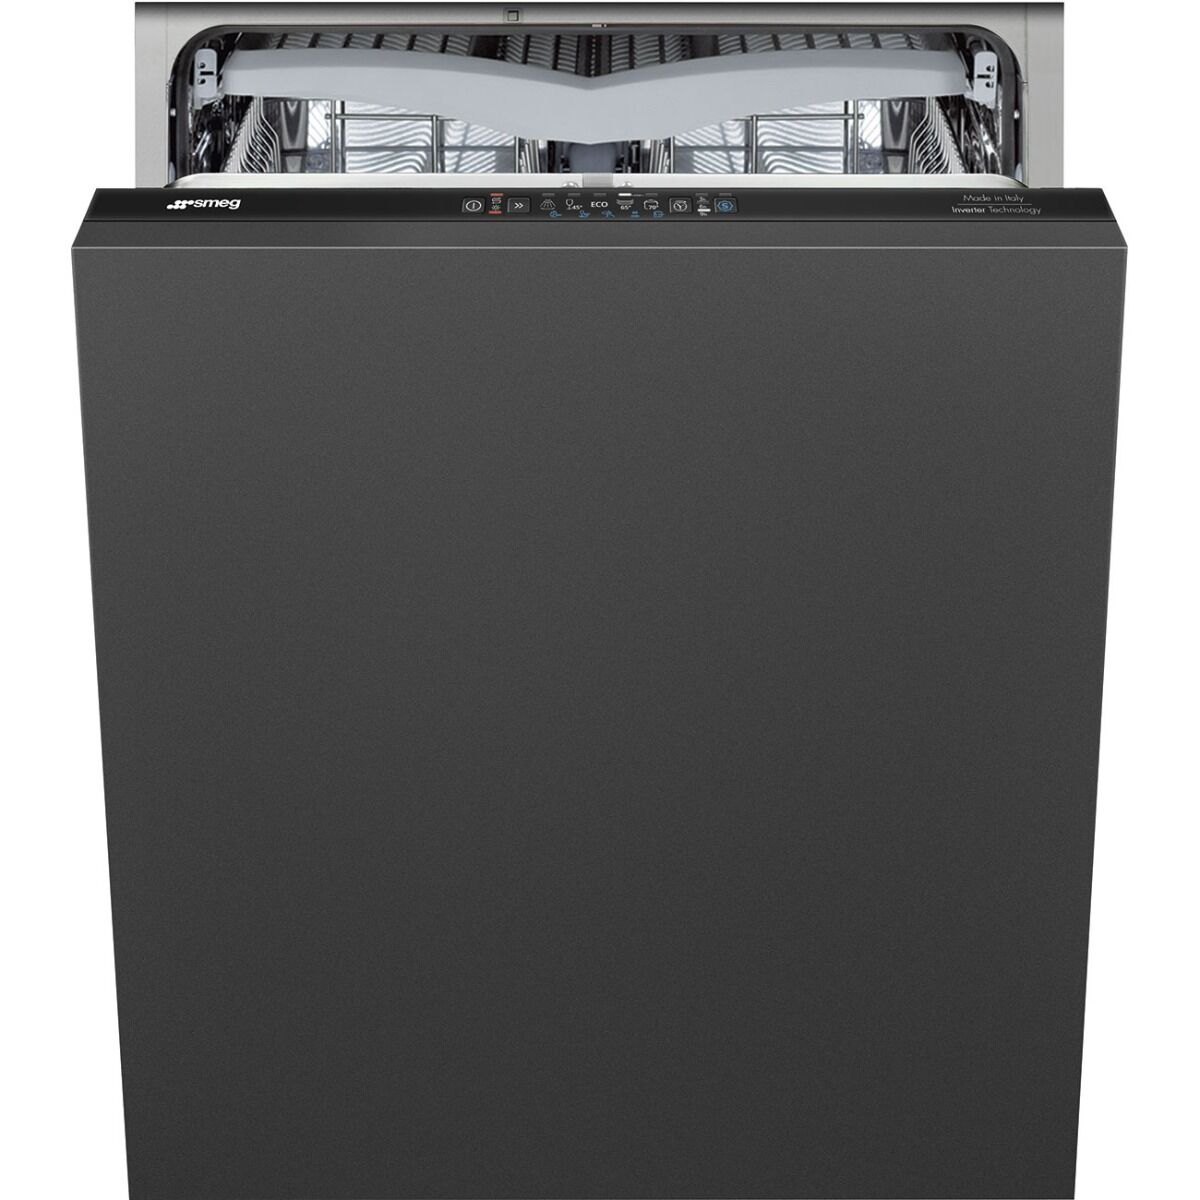 Smeg DI361C 60cm Fully Integrated Dishwasher - Stainless Steel